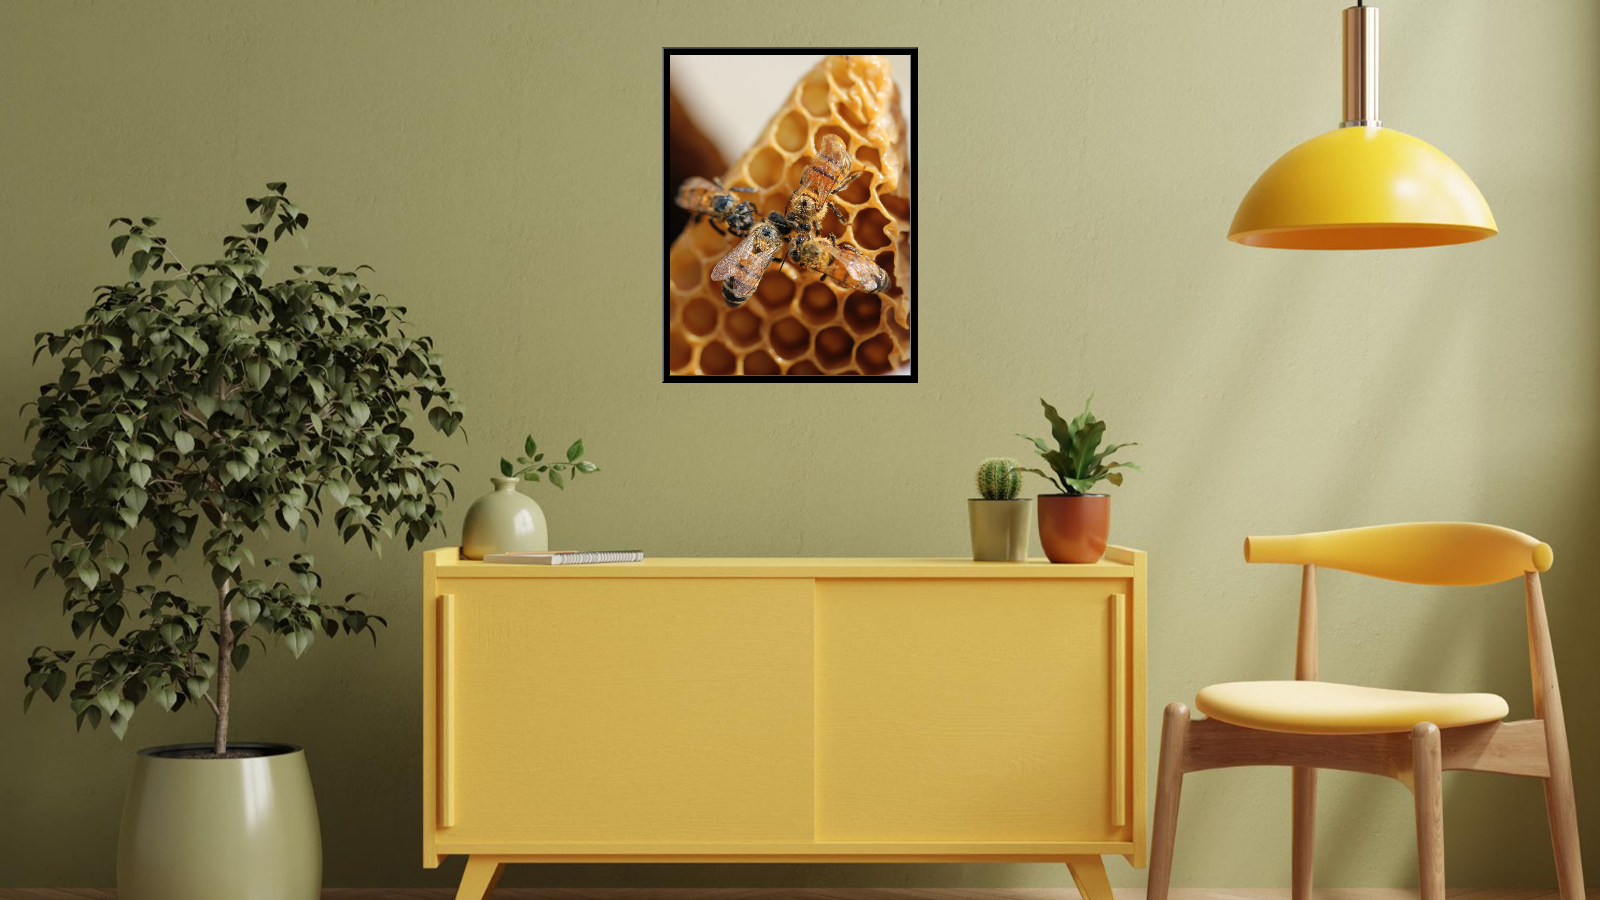 Four honey bees on a honeycomb